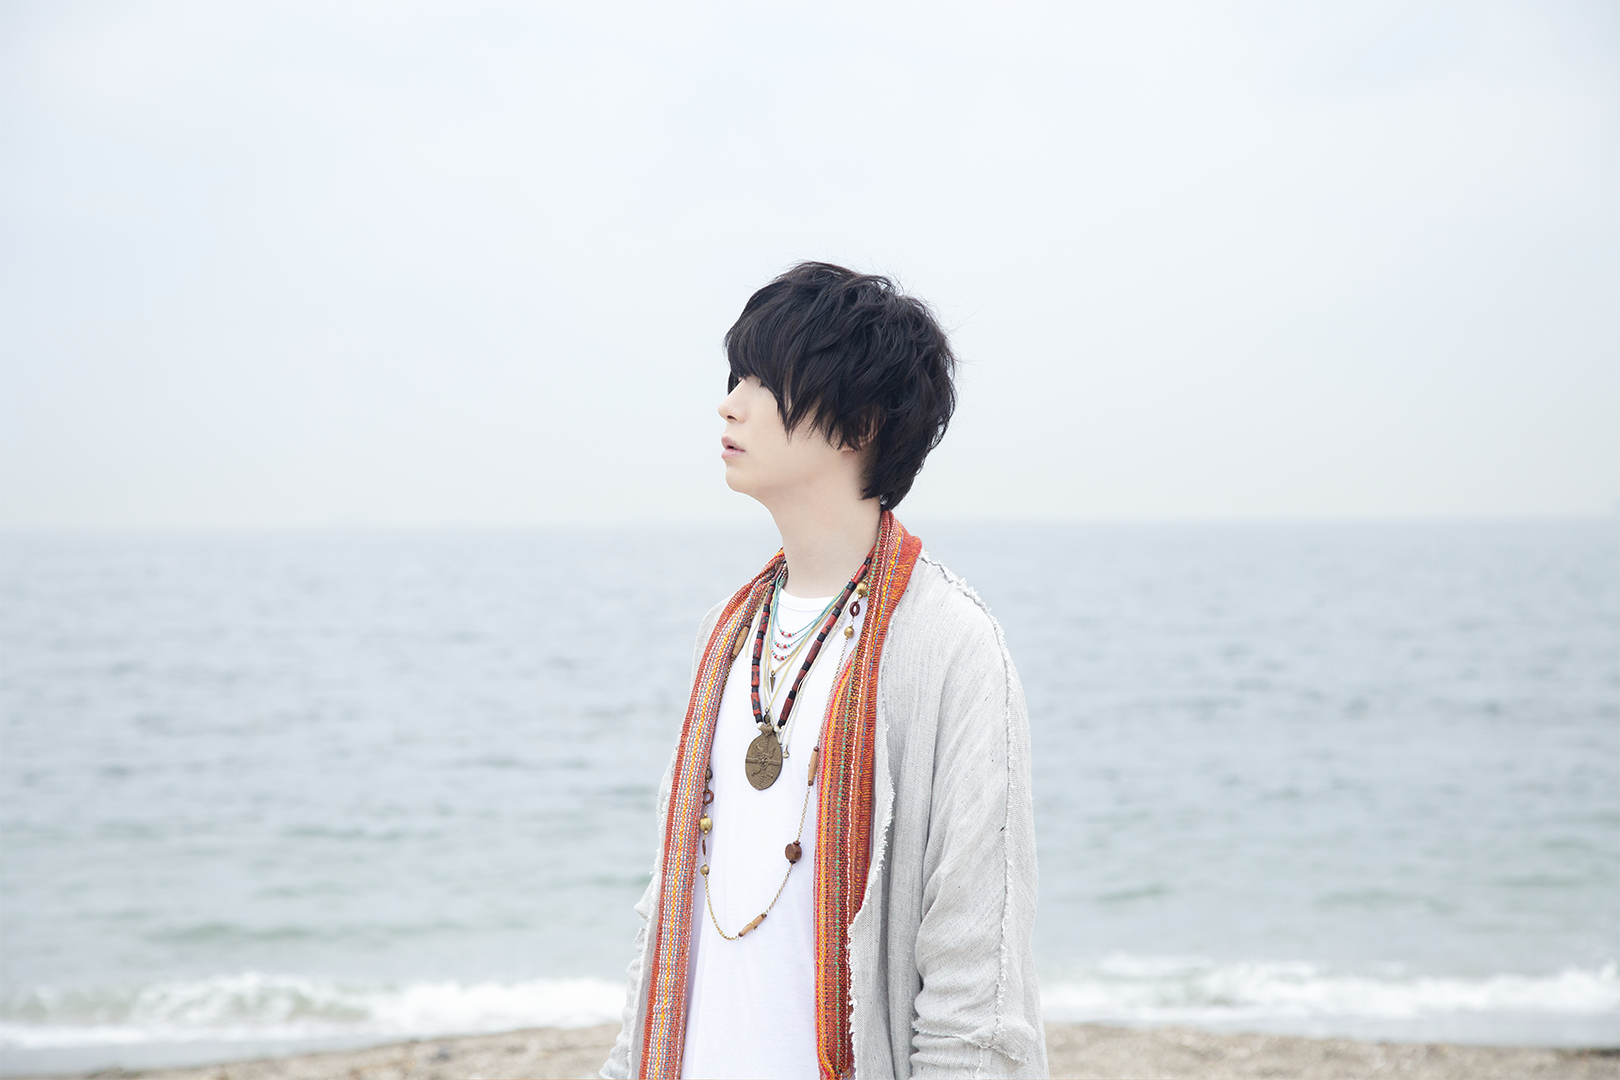 Profile そらる Official Website